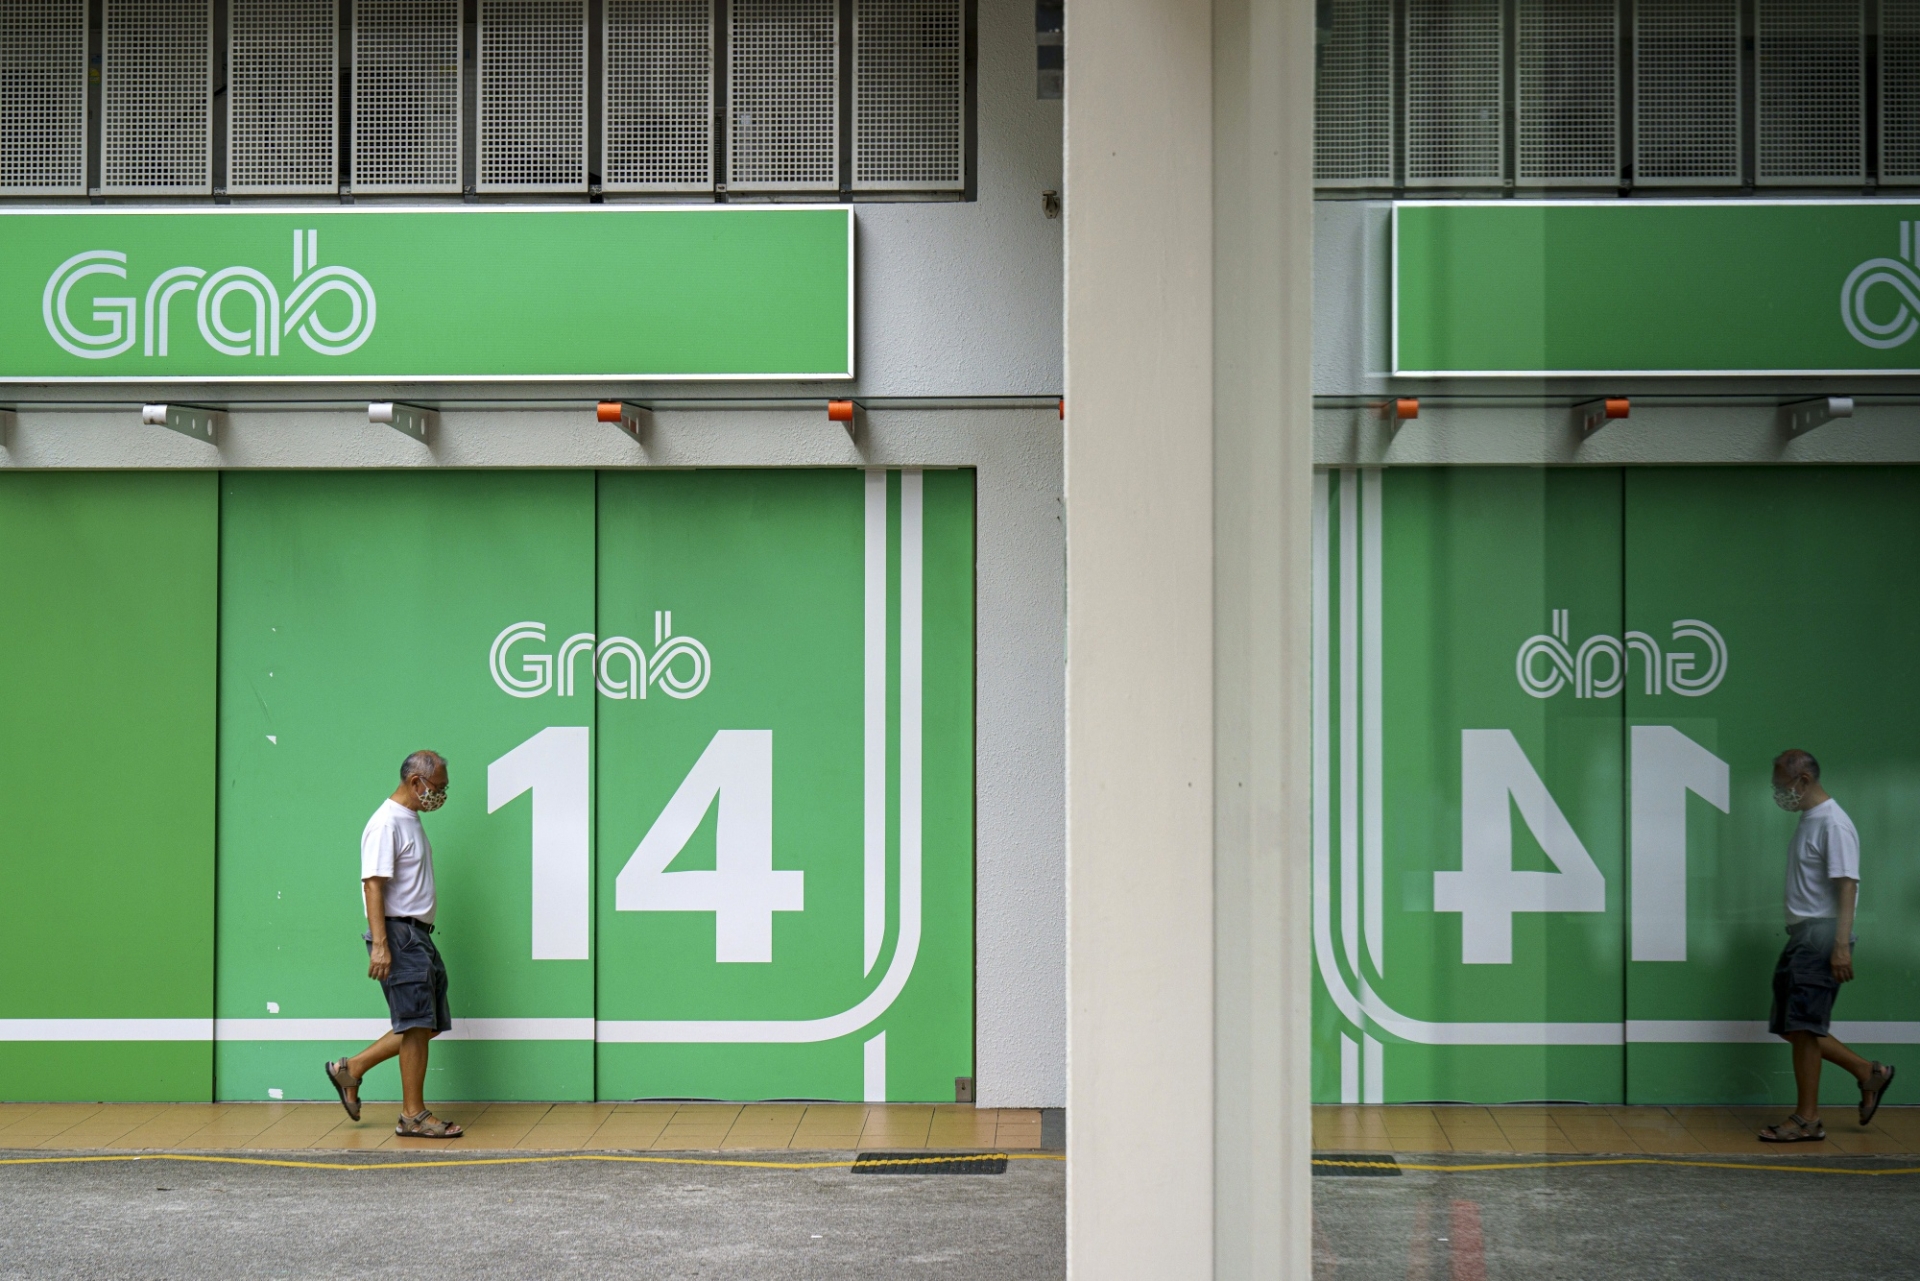 grab plans to go public in us in partnership with altimeter